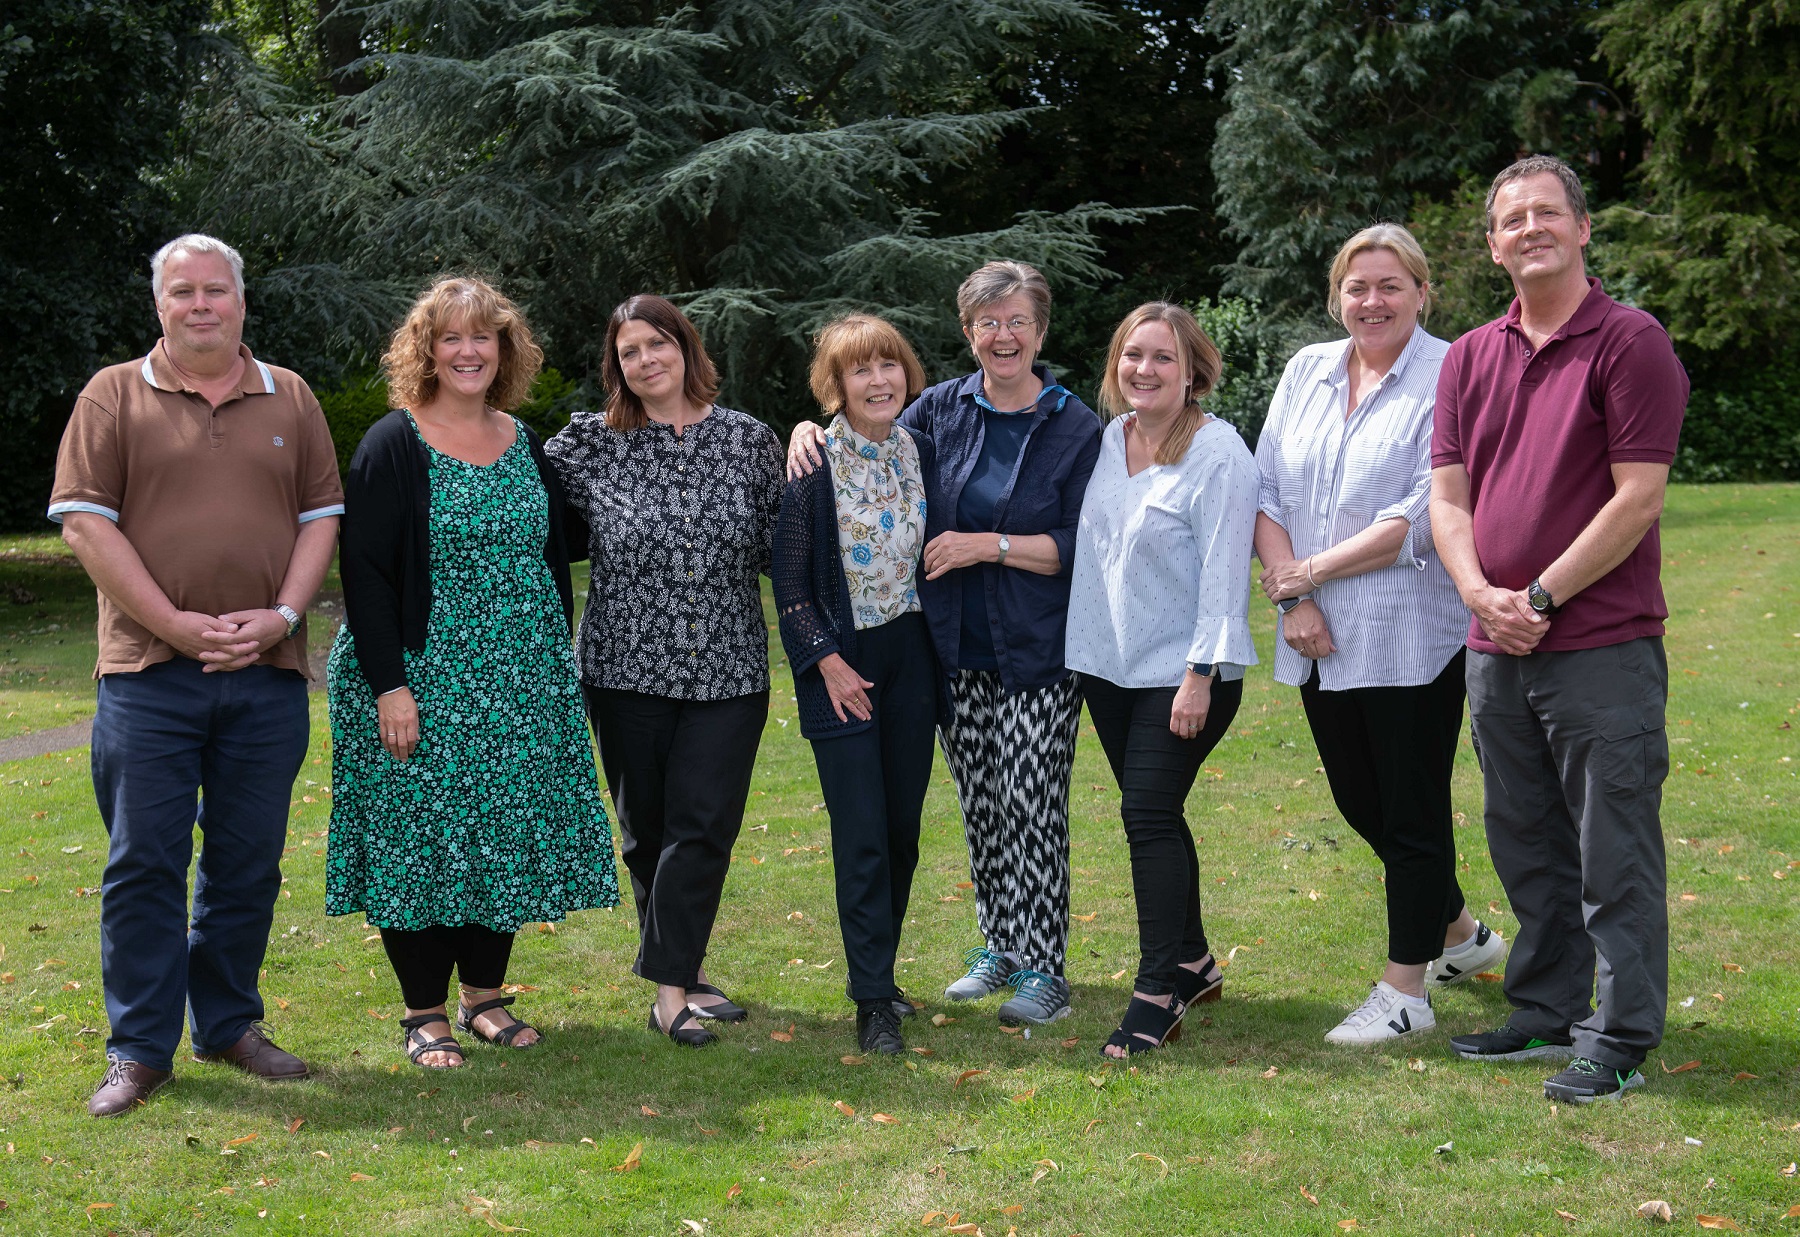 Members of our supported employment team